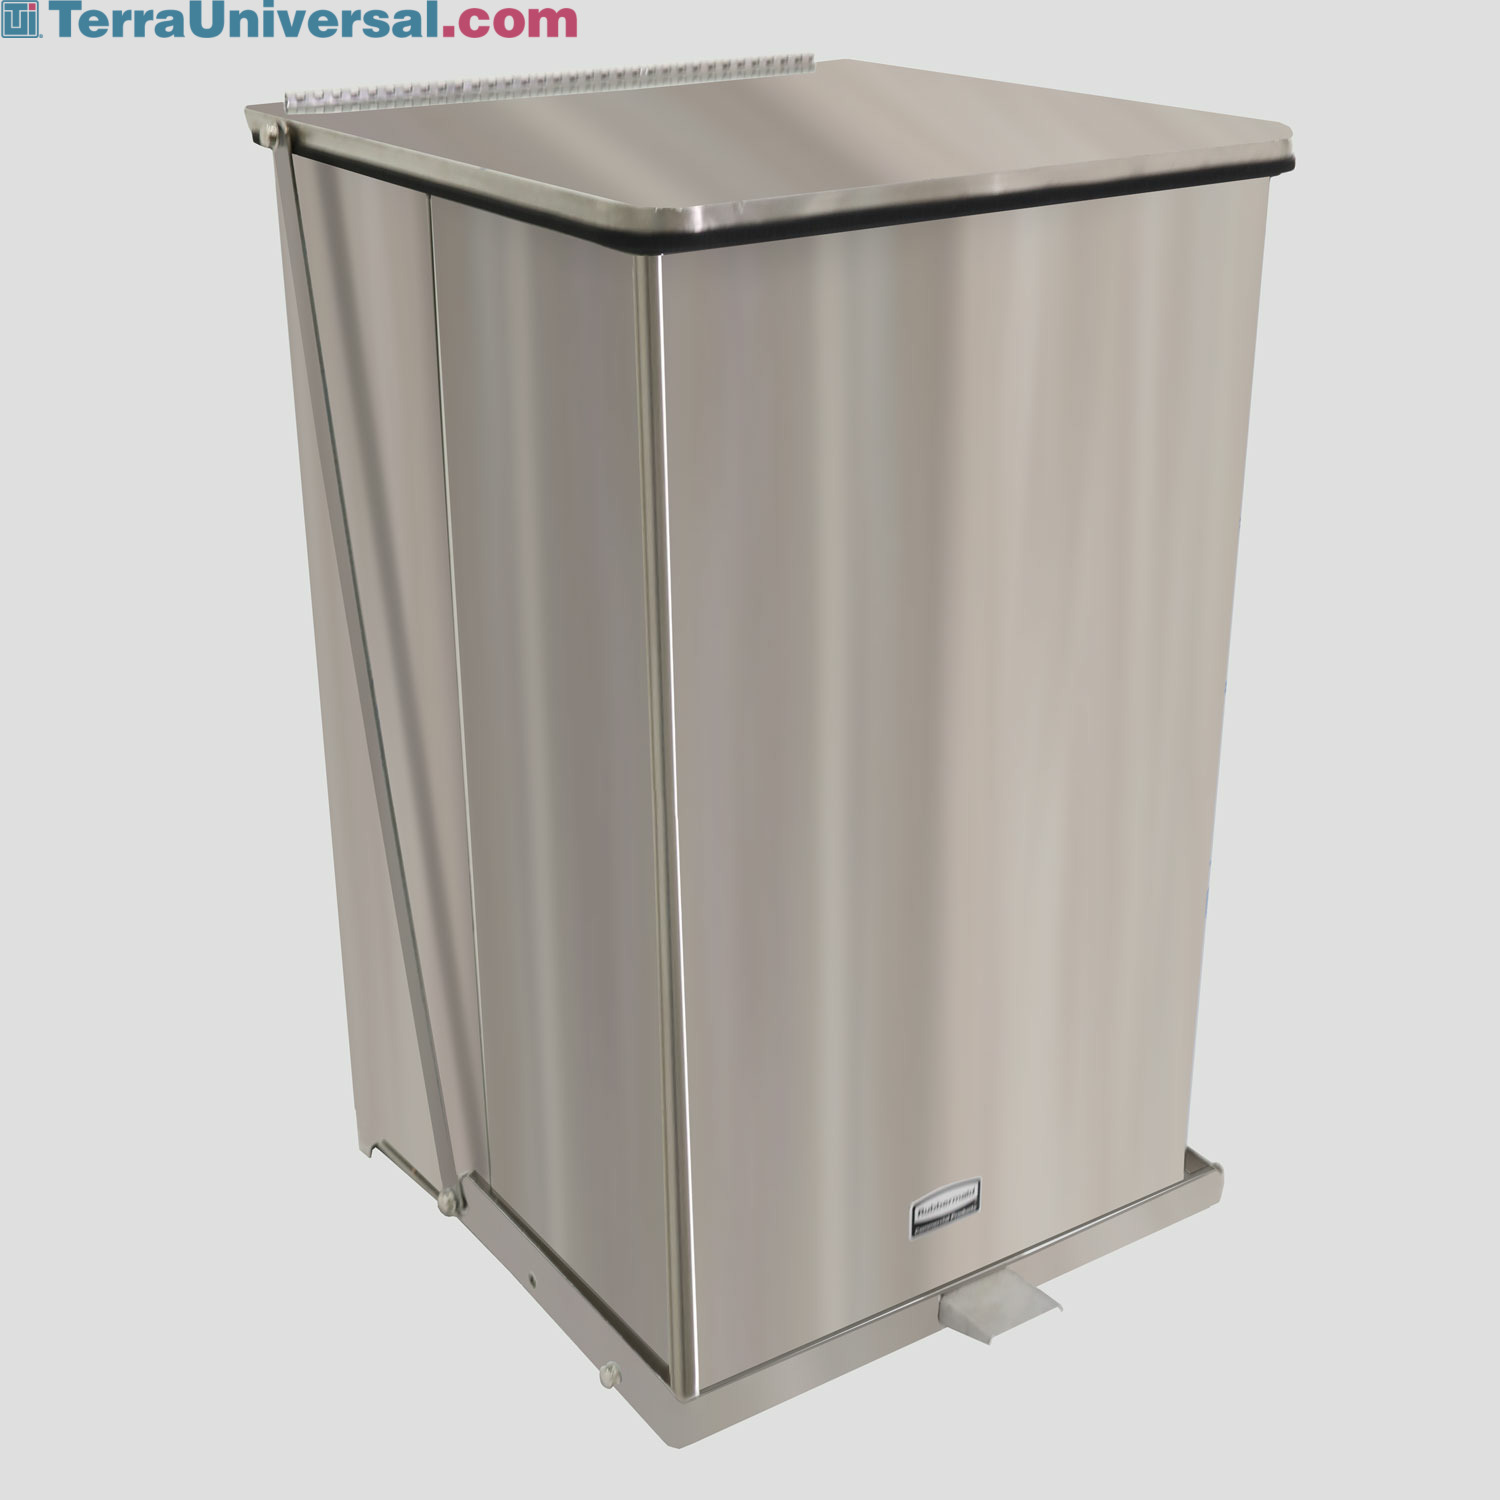 40-Gallon Receptacle with Raised Lid - Standard Color Series (Quick Ship)